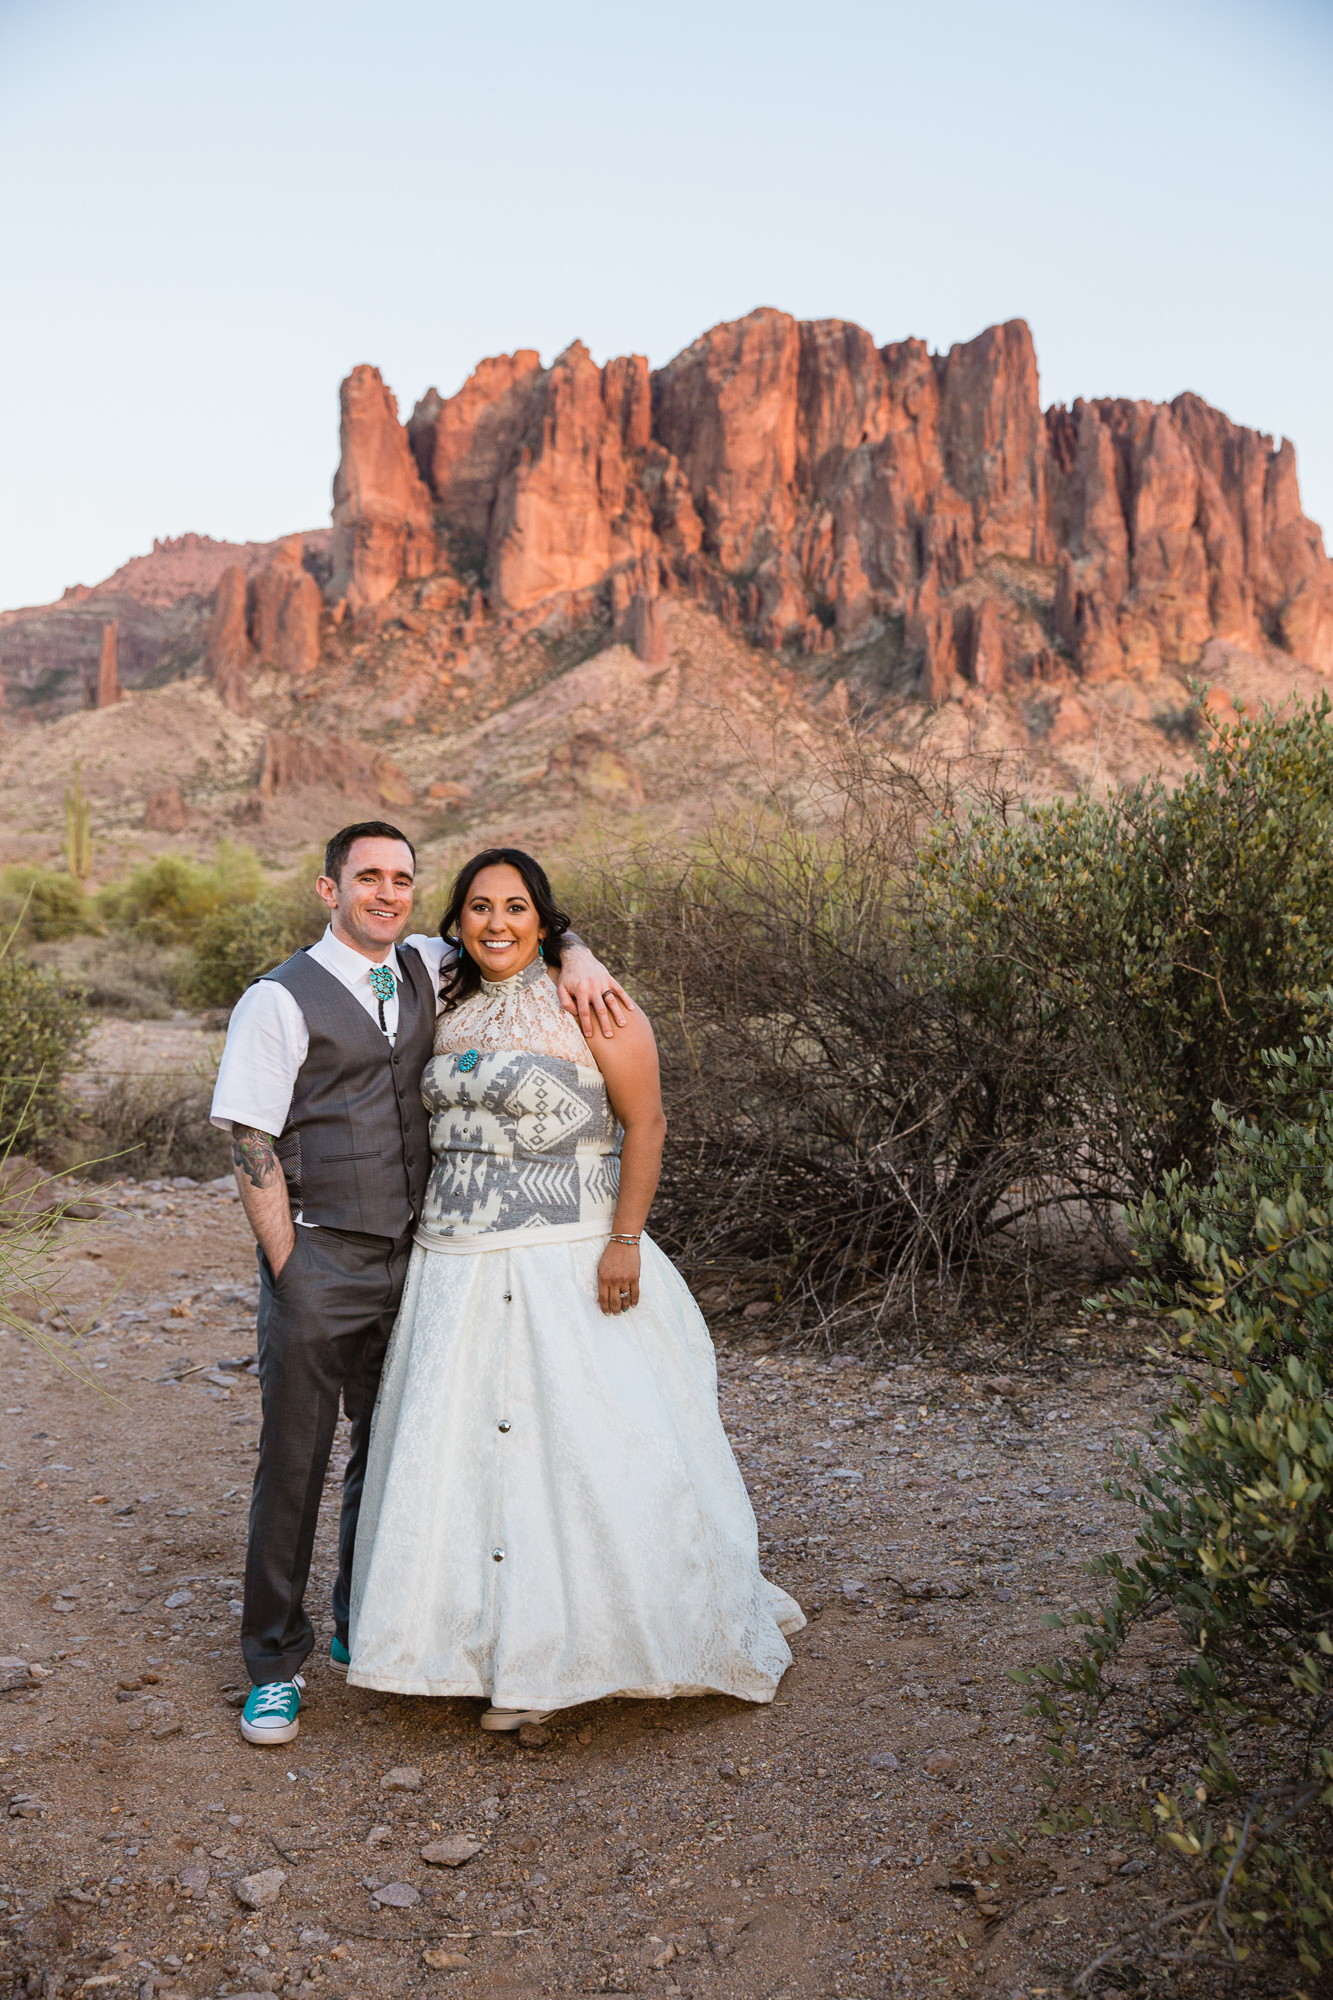 Tattooed groom and bride in Navajo dress at the superstition mountains at Lost Dutchman state park by Arizona wedding photographer PMA Photography.